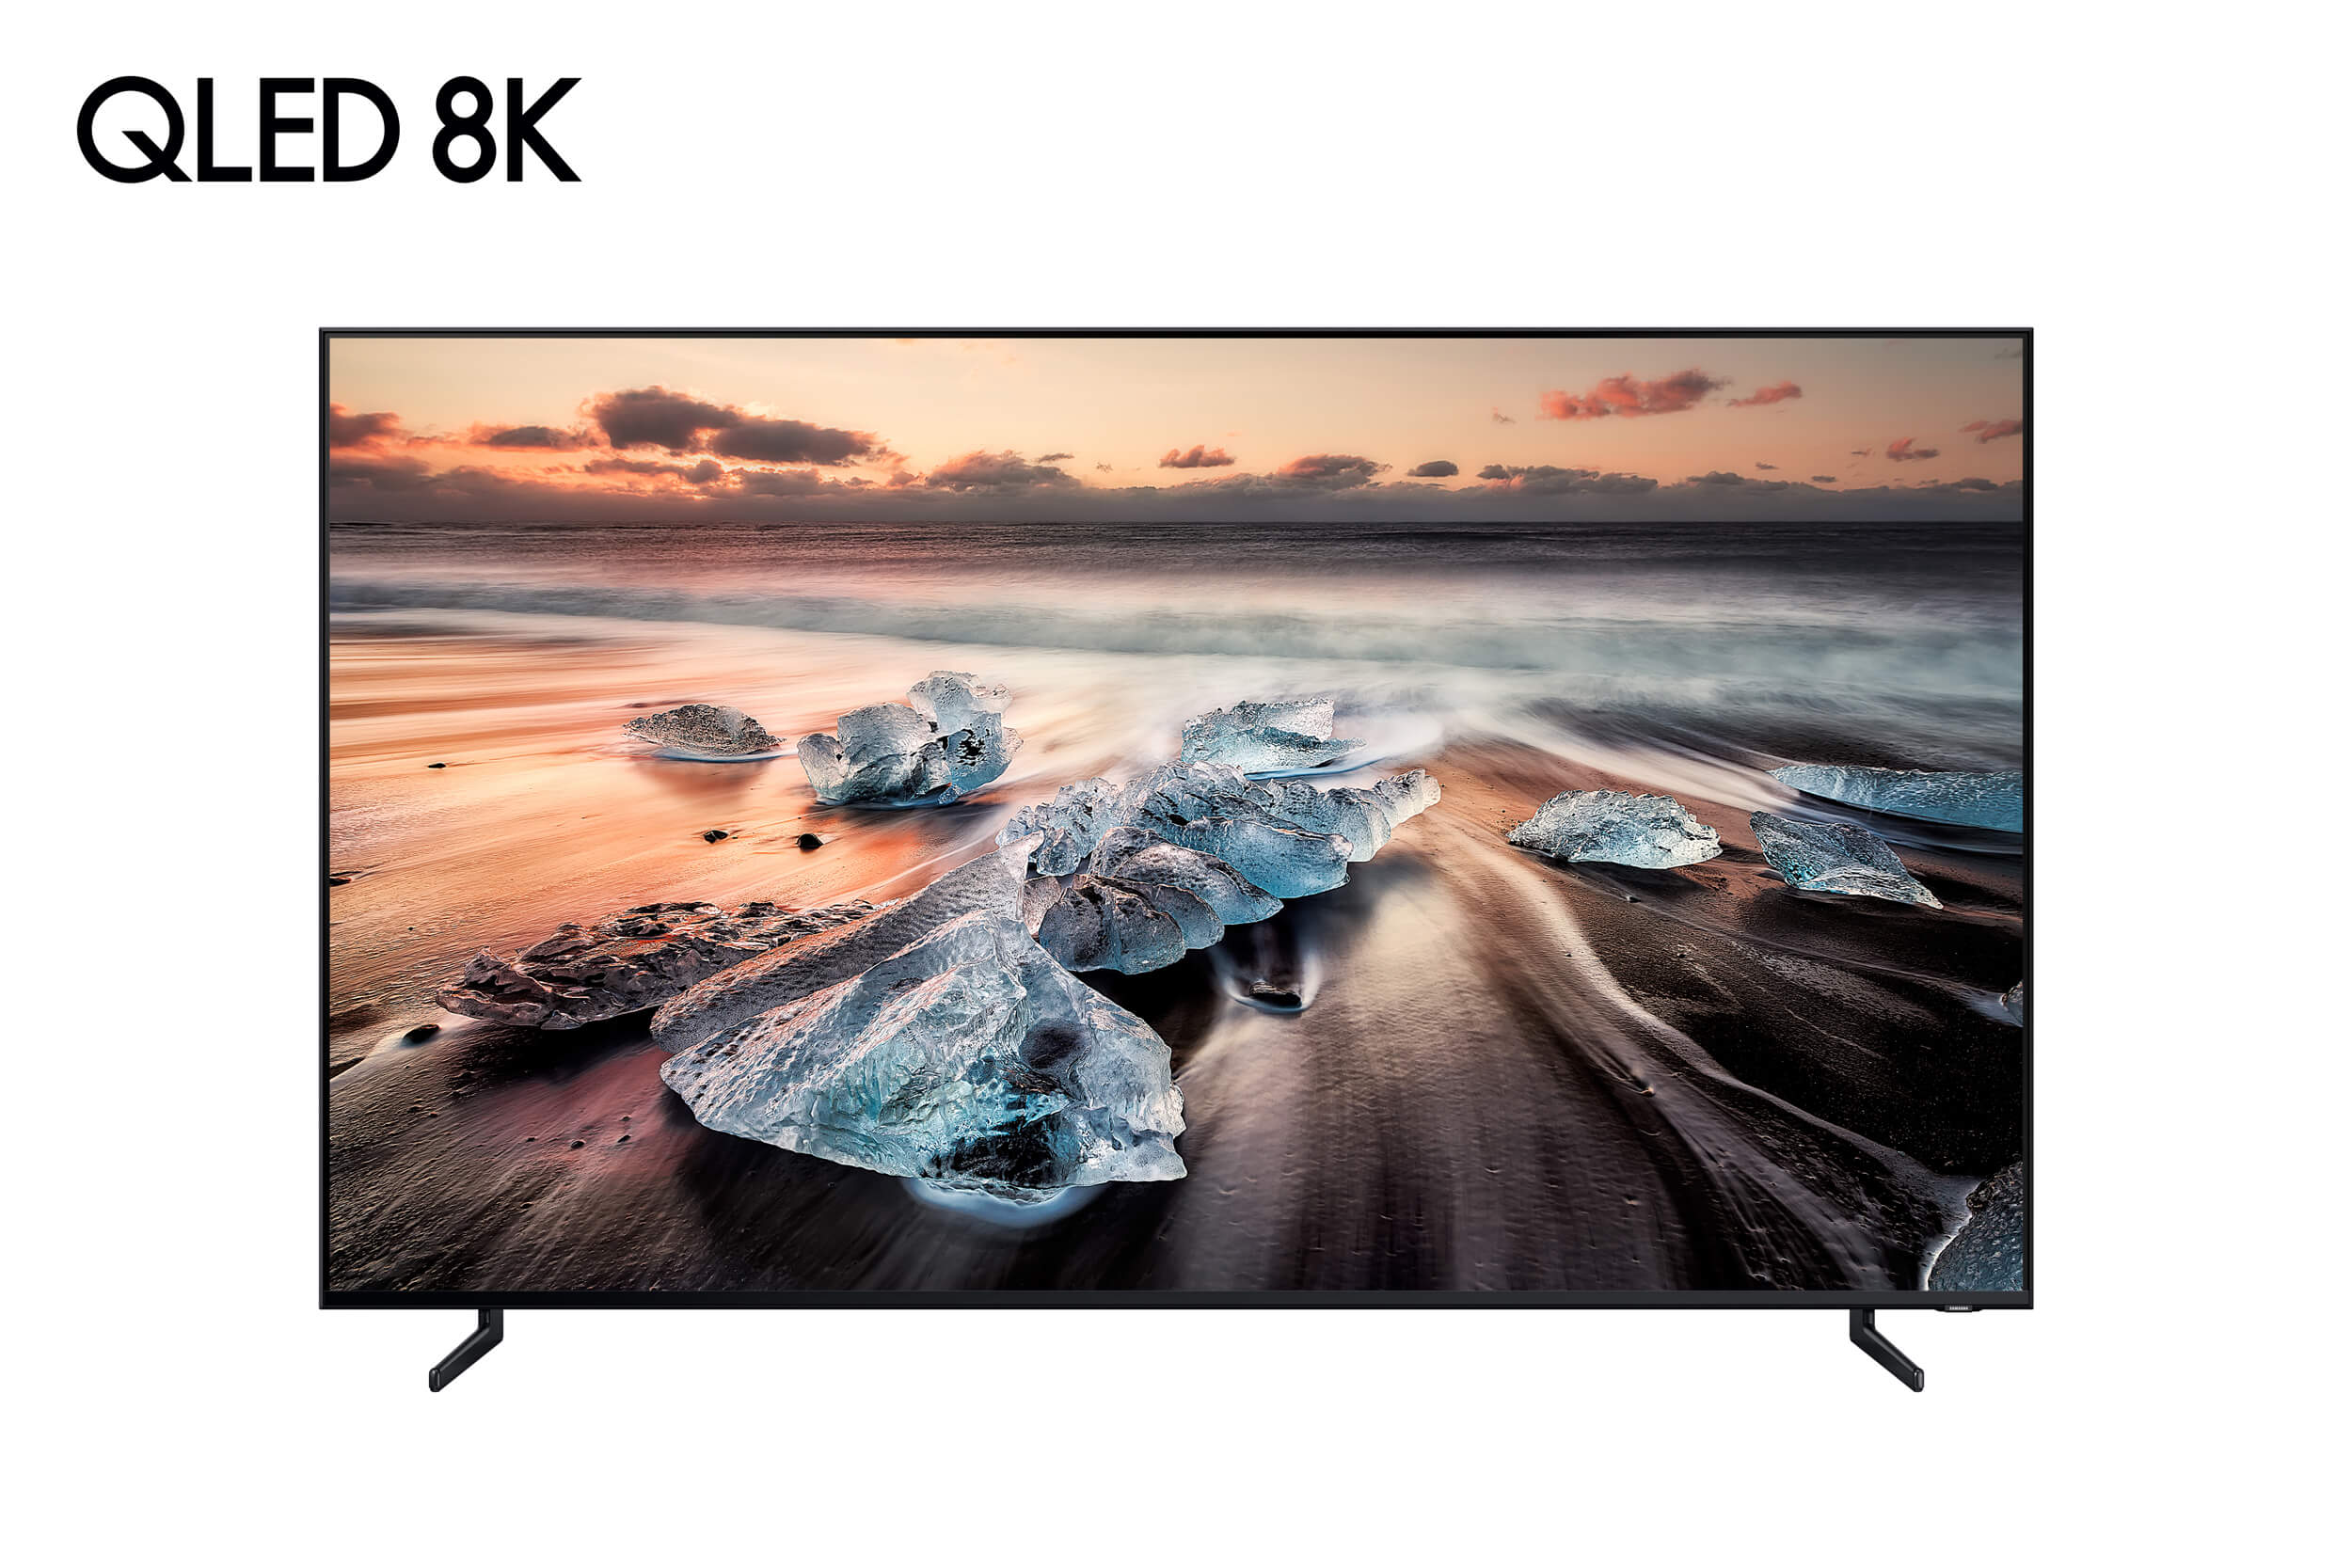 Samsung reveals QLED 8K TVs that are actually headed to retail stores